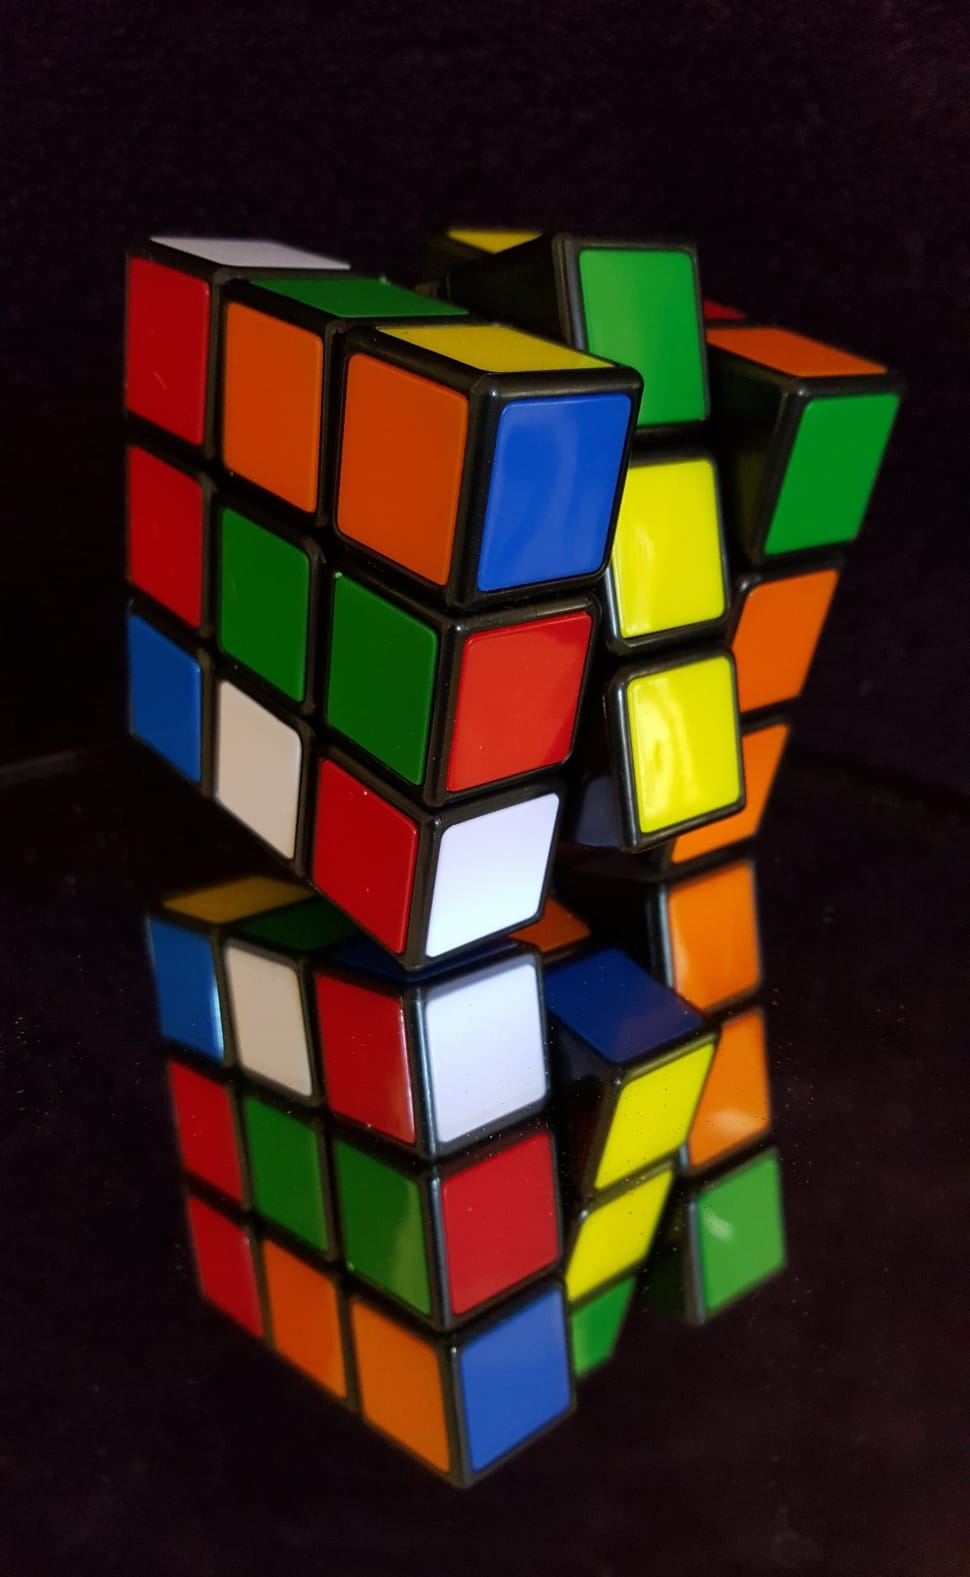 Two 3 By 3 Rubik S Cube Preview - Rubik's Cube , HD Wallpaper & Backgrounds